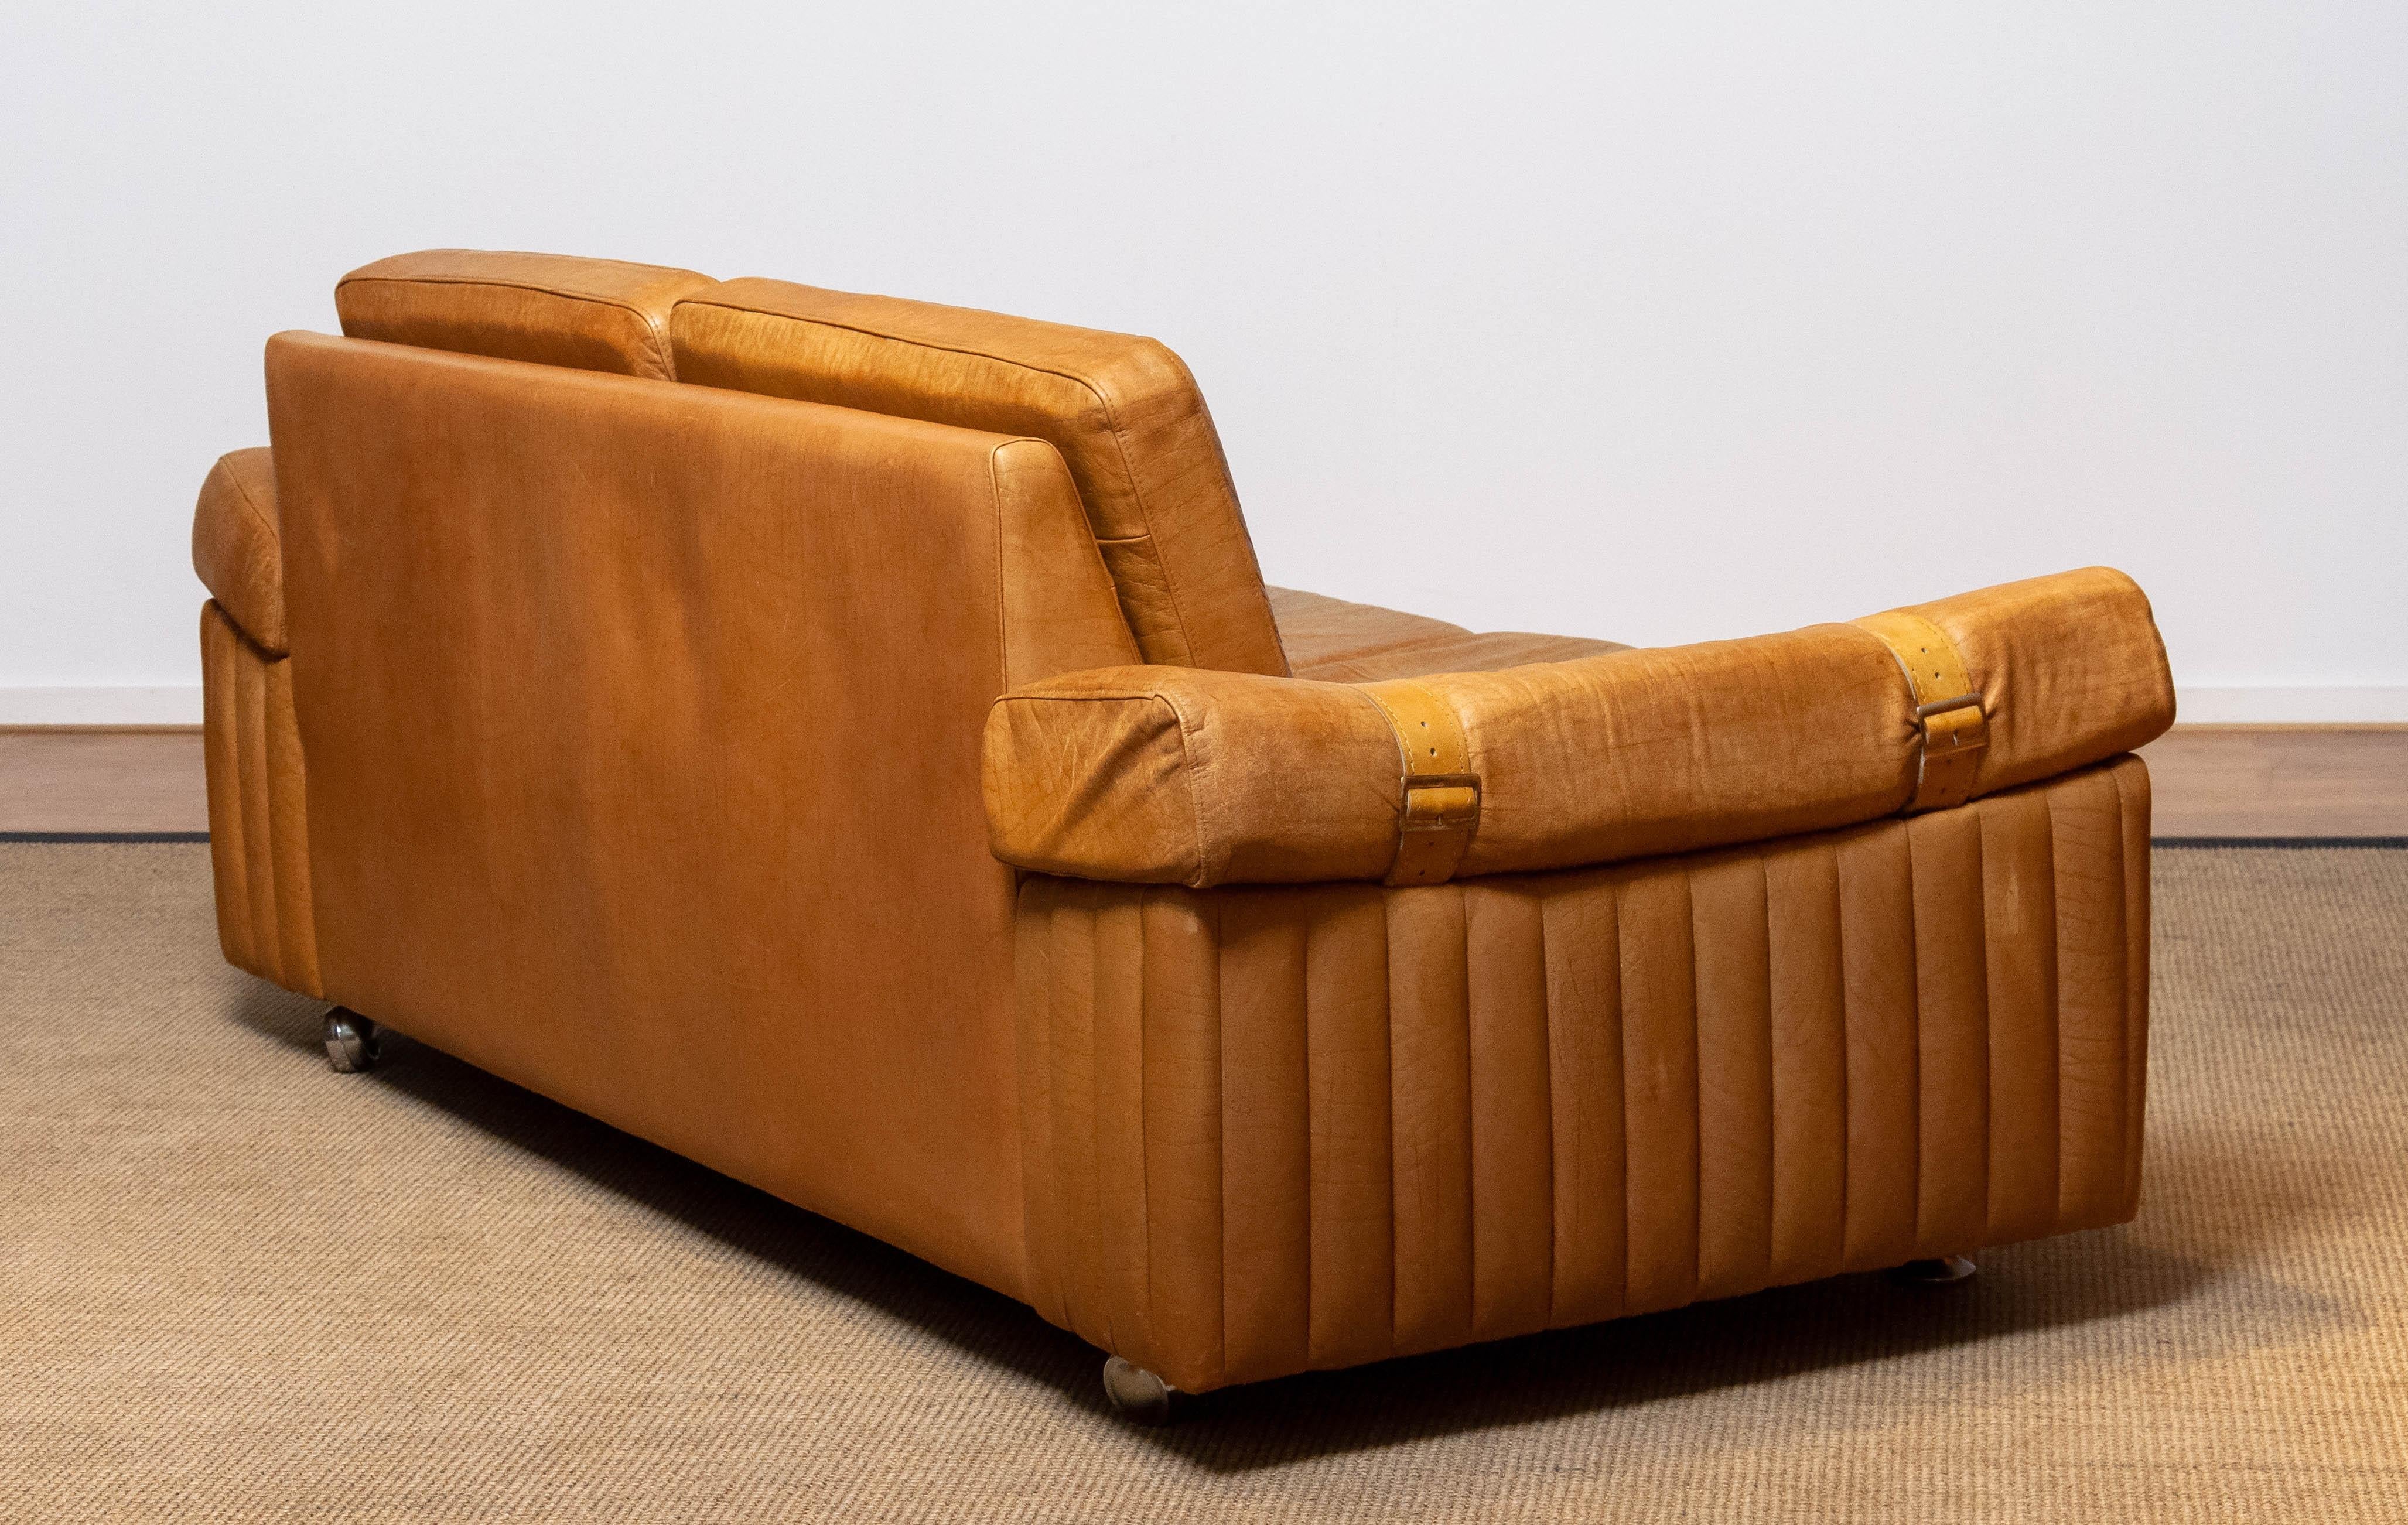 1970s Scandinavian Brutalist Two-Seater Low-Back Sofa in Camel Colored Leather For Sale 2